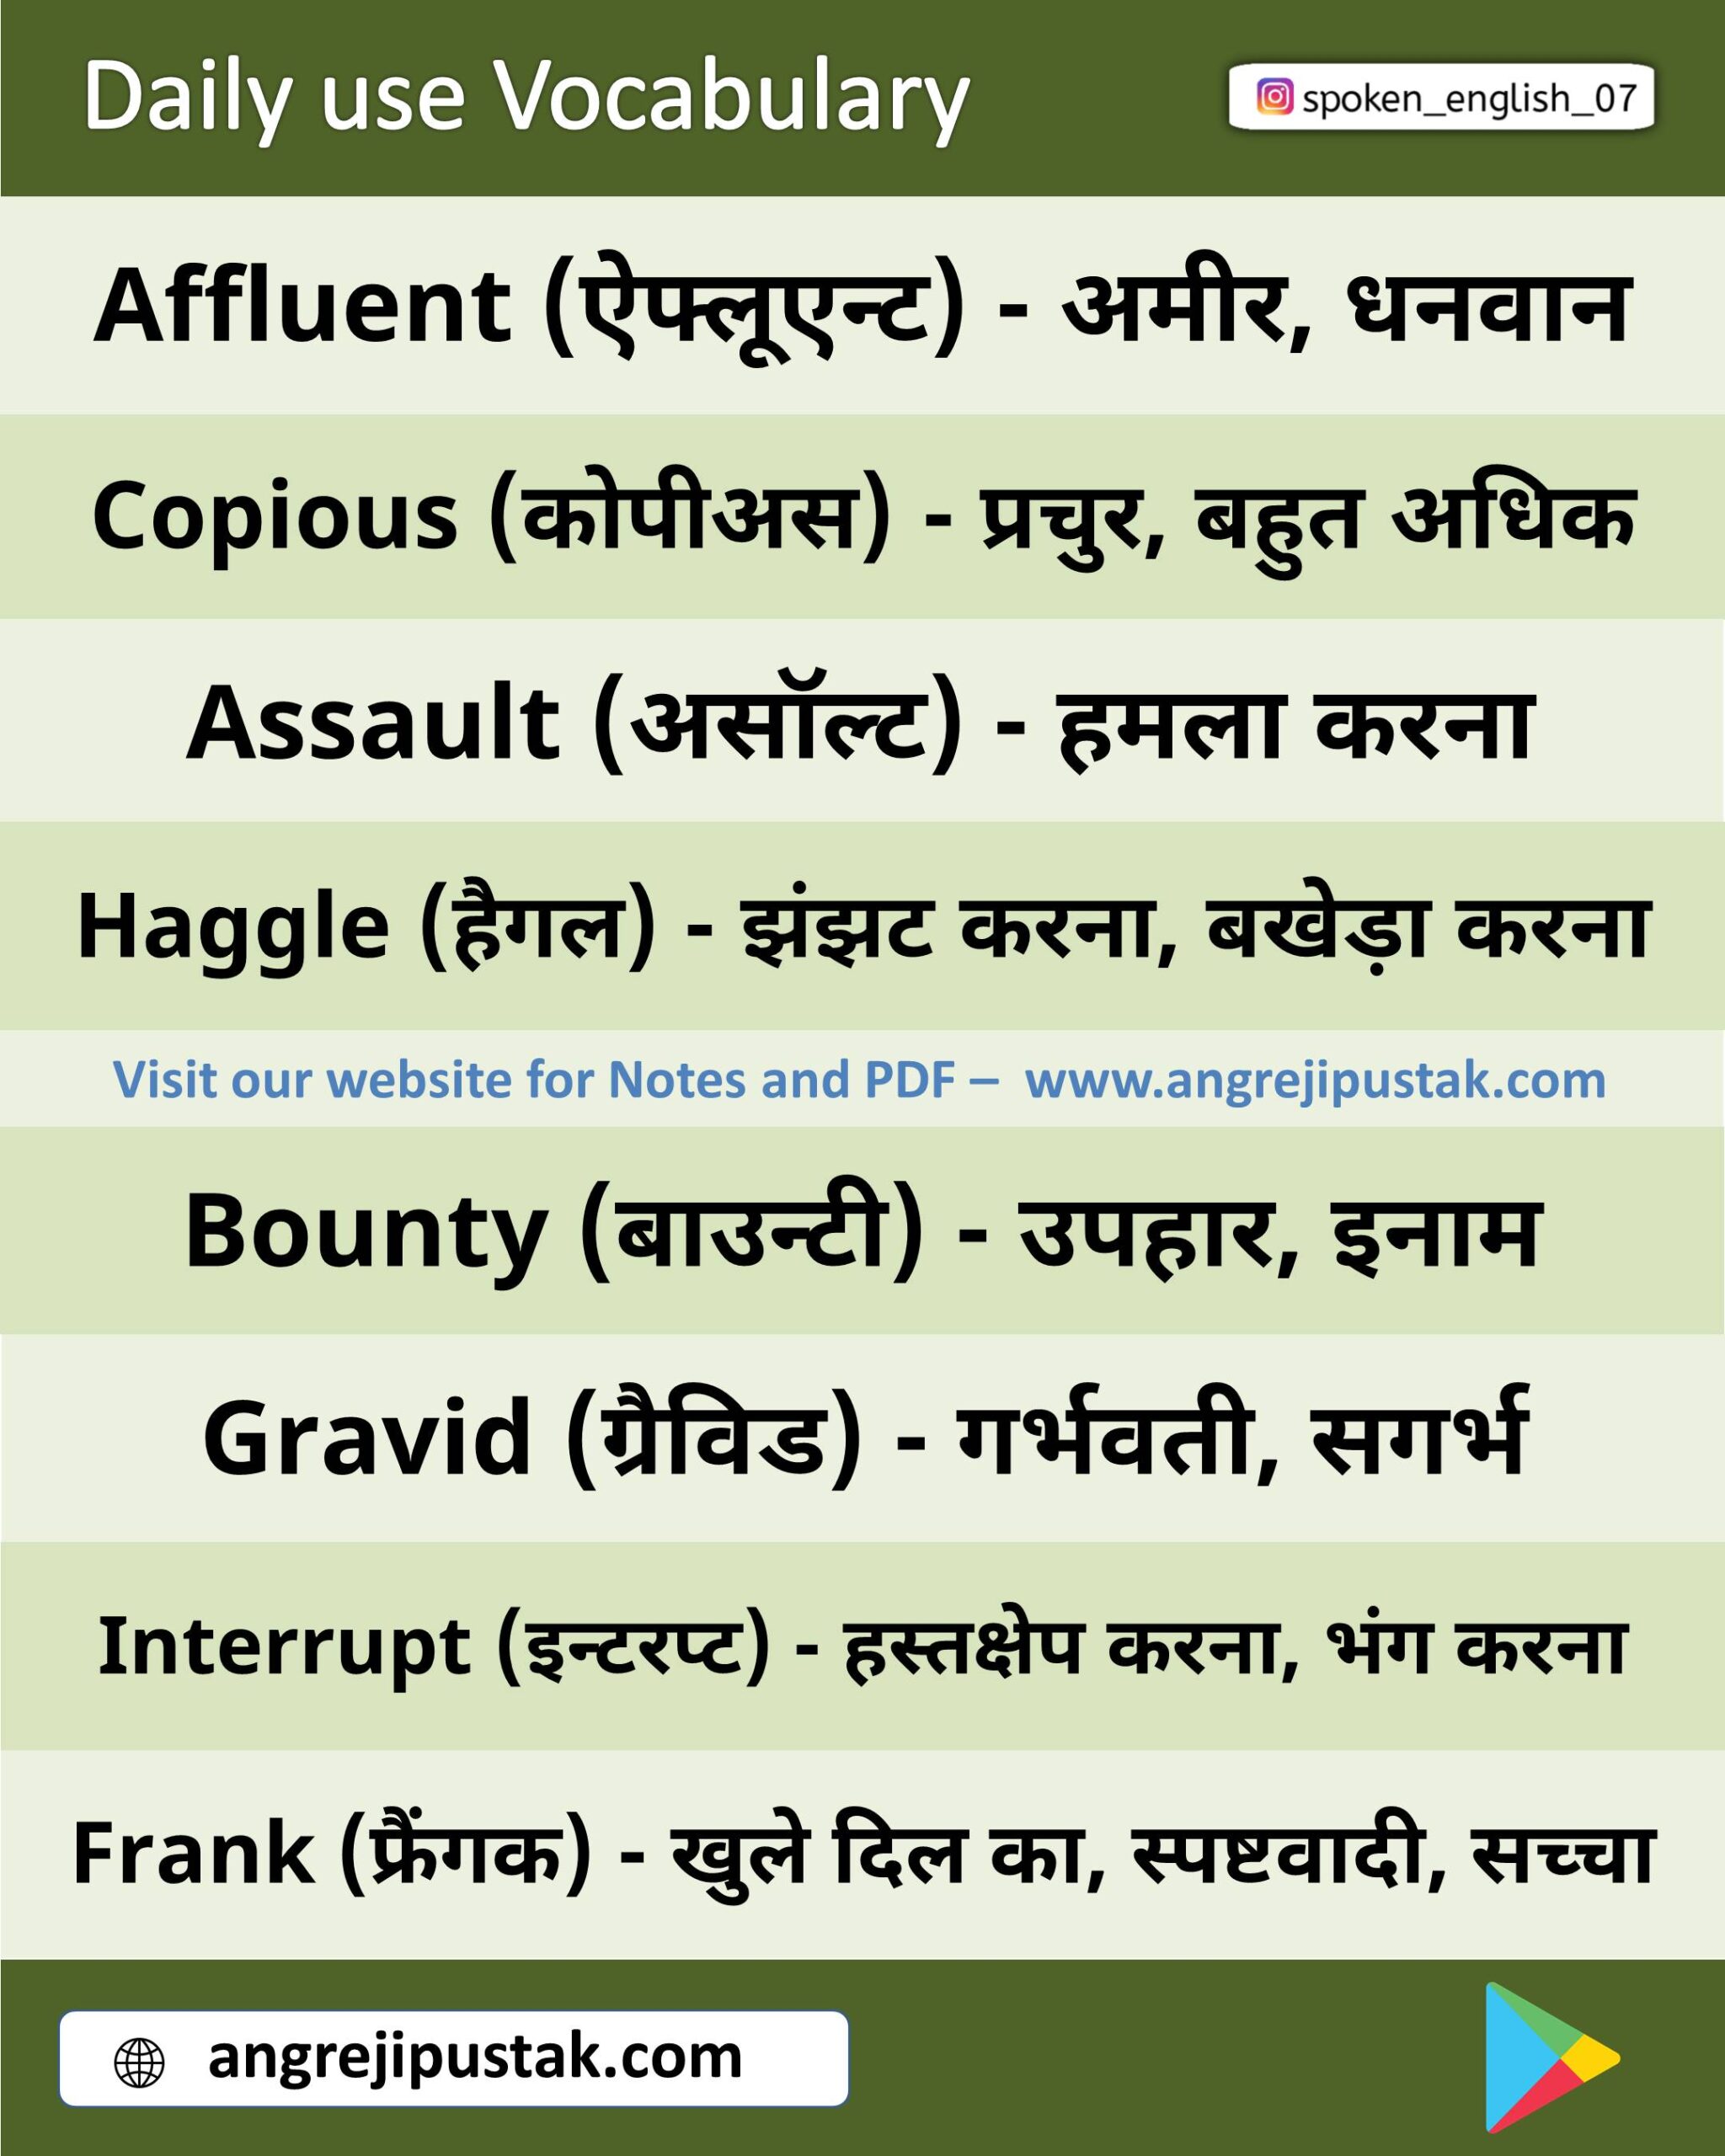 20 important New English words with Hindi meanings, Pronunciation, synonyms...